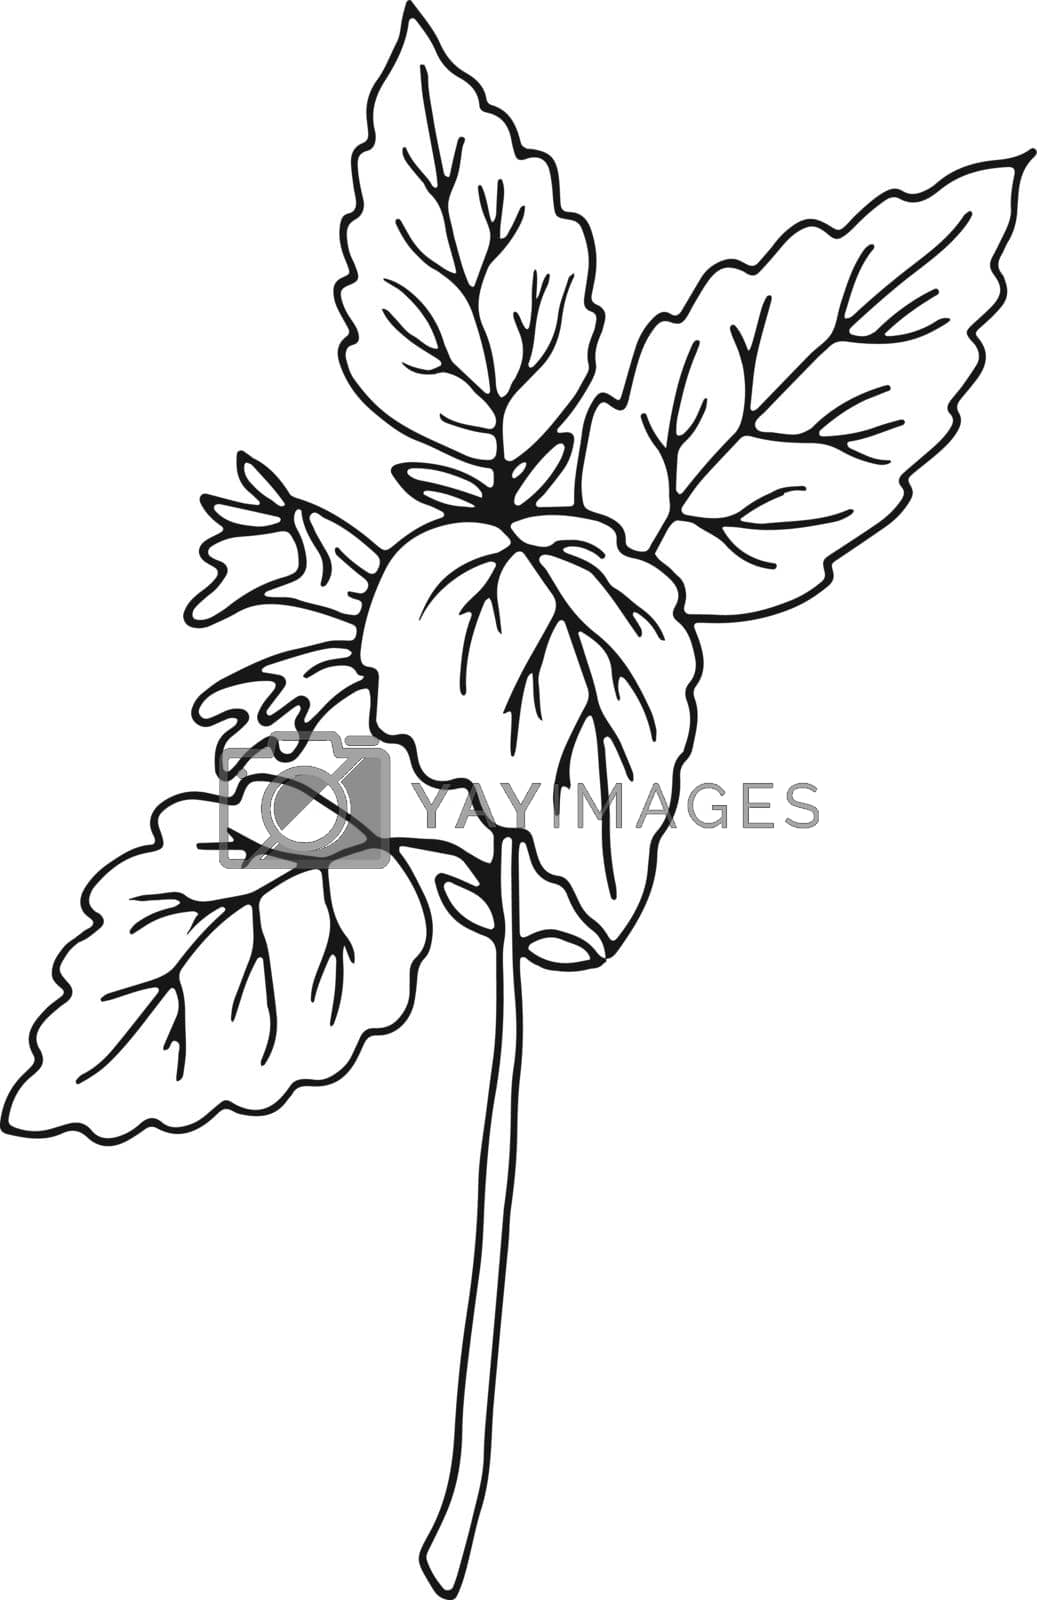 Royalty free image of Peppermint plant. Natural herb flower botanical drawing by ONYXprj